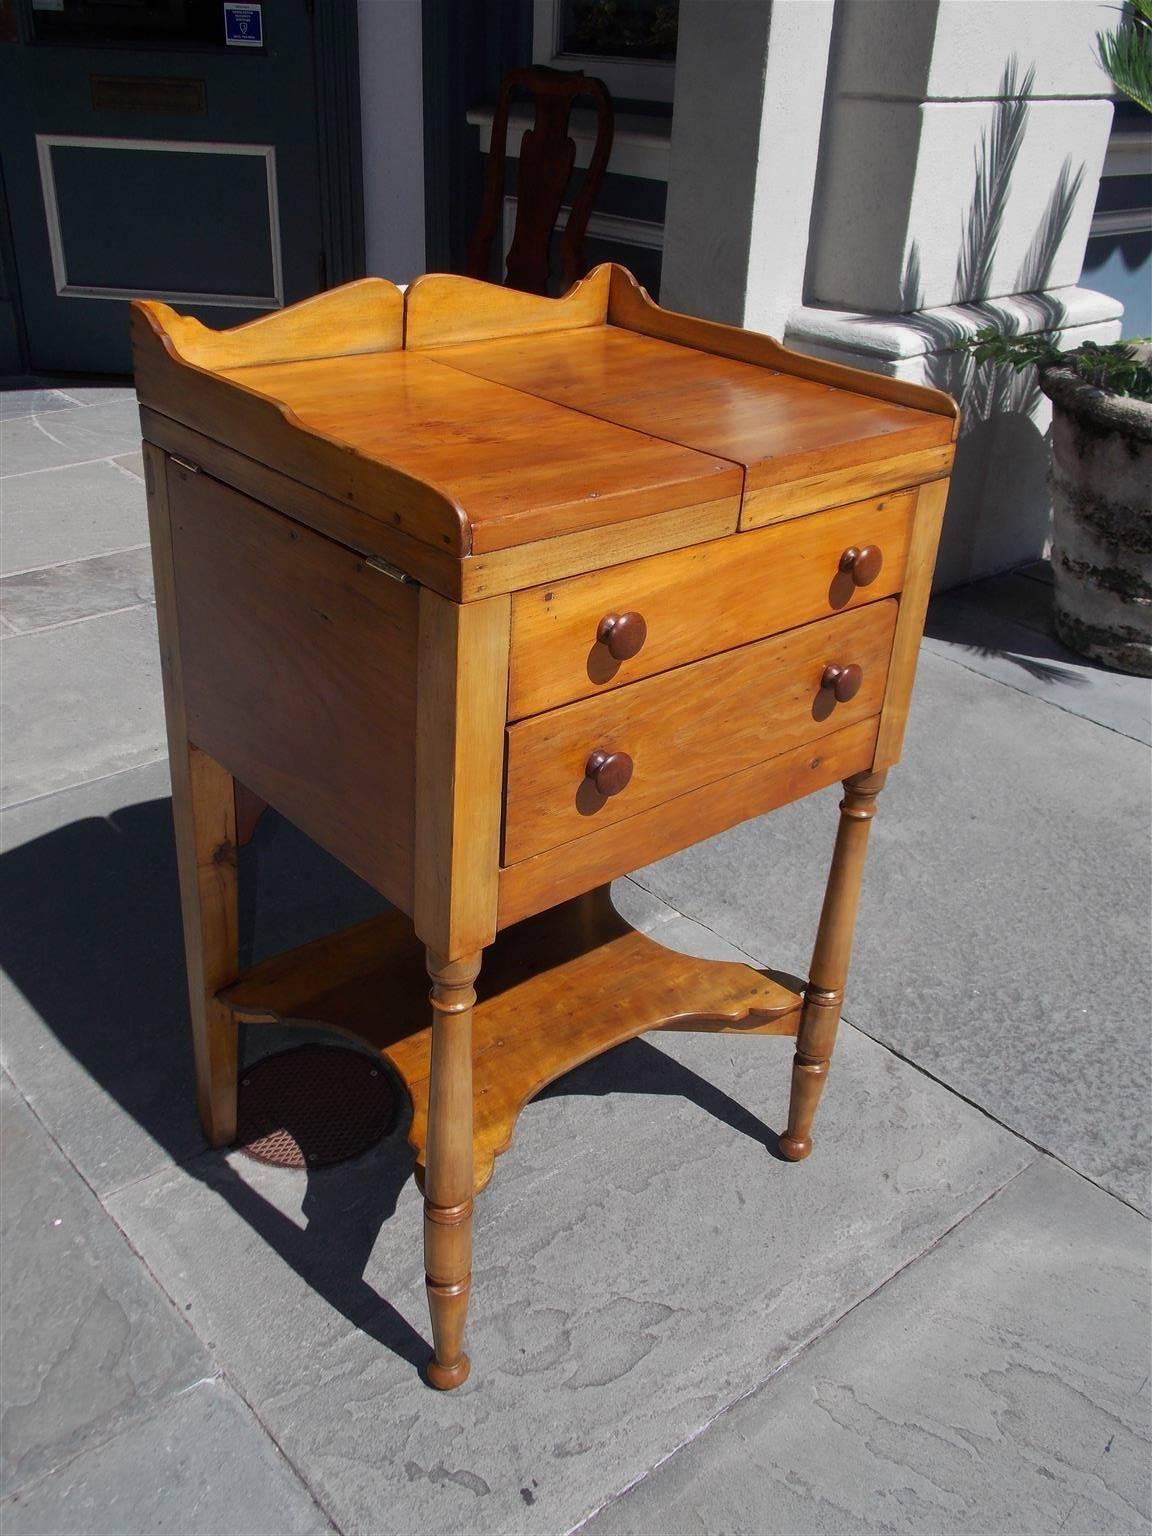 American Sheraton maple and cherry one drawer wash stand with scalloped gallery, hinged top revealing a circular fitted interior for basin, sliding rear adjustable mirror, original cherry wood knobs, lower supported shelf, and terminating on the